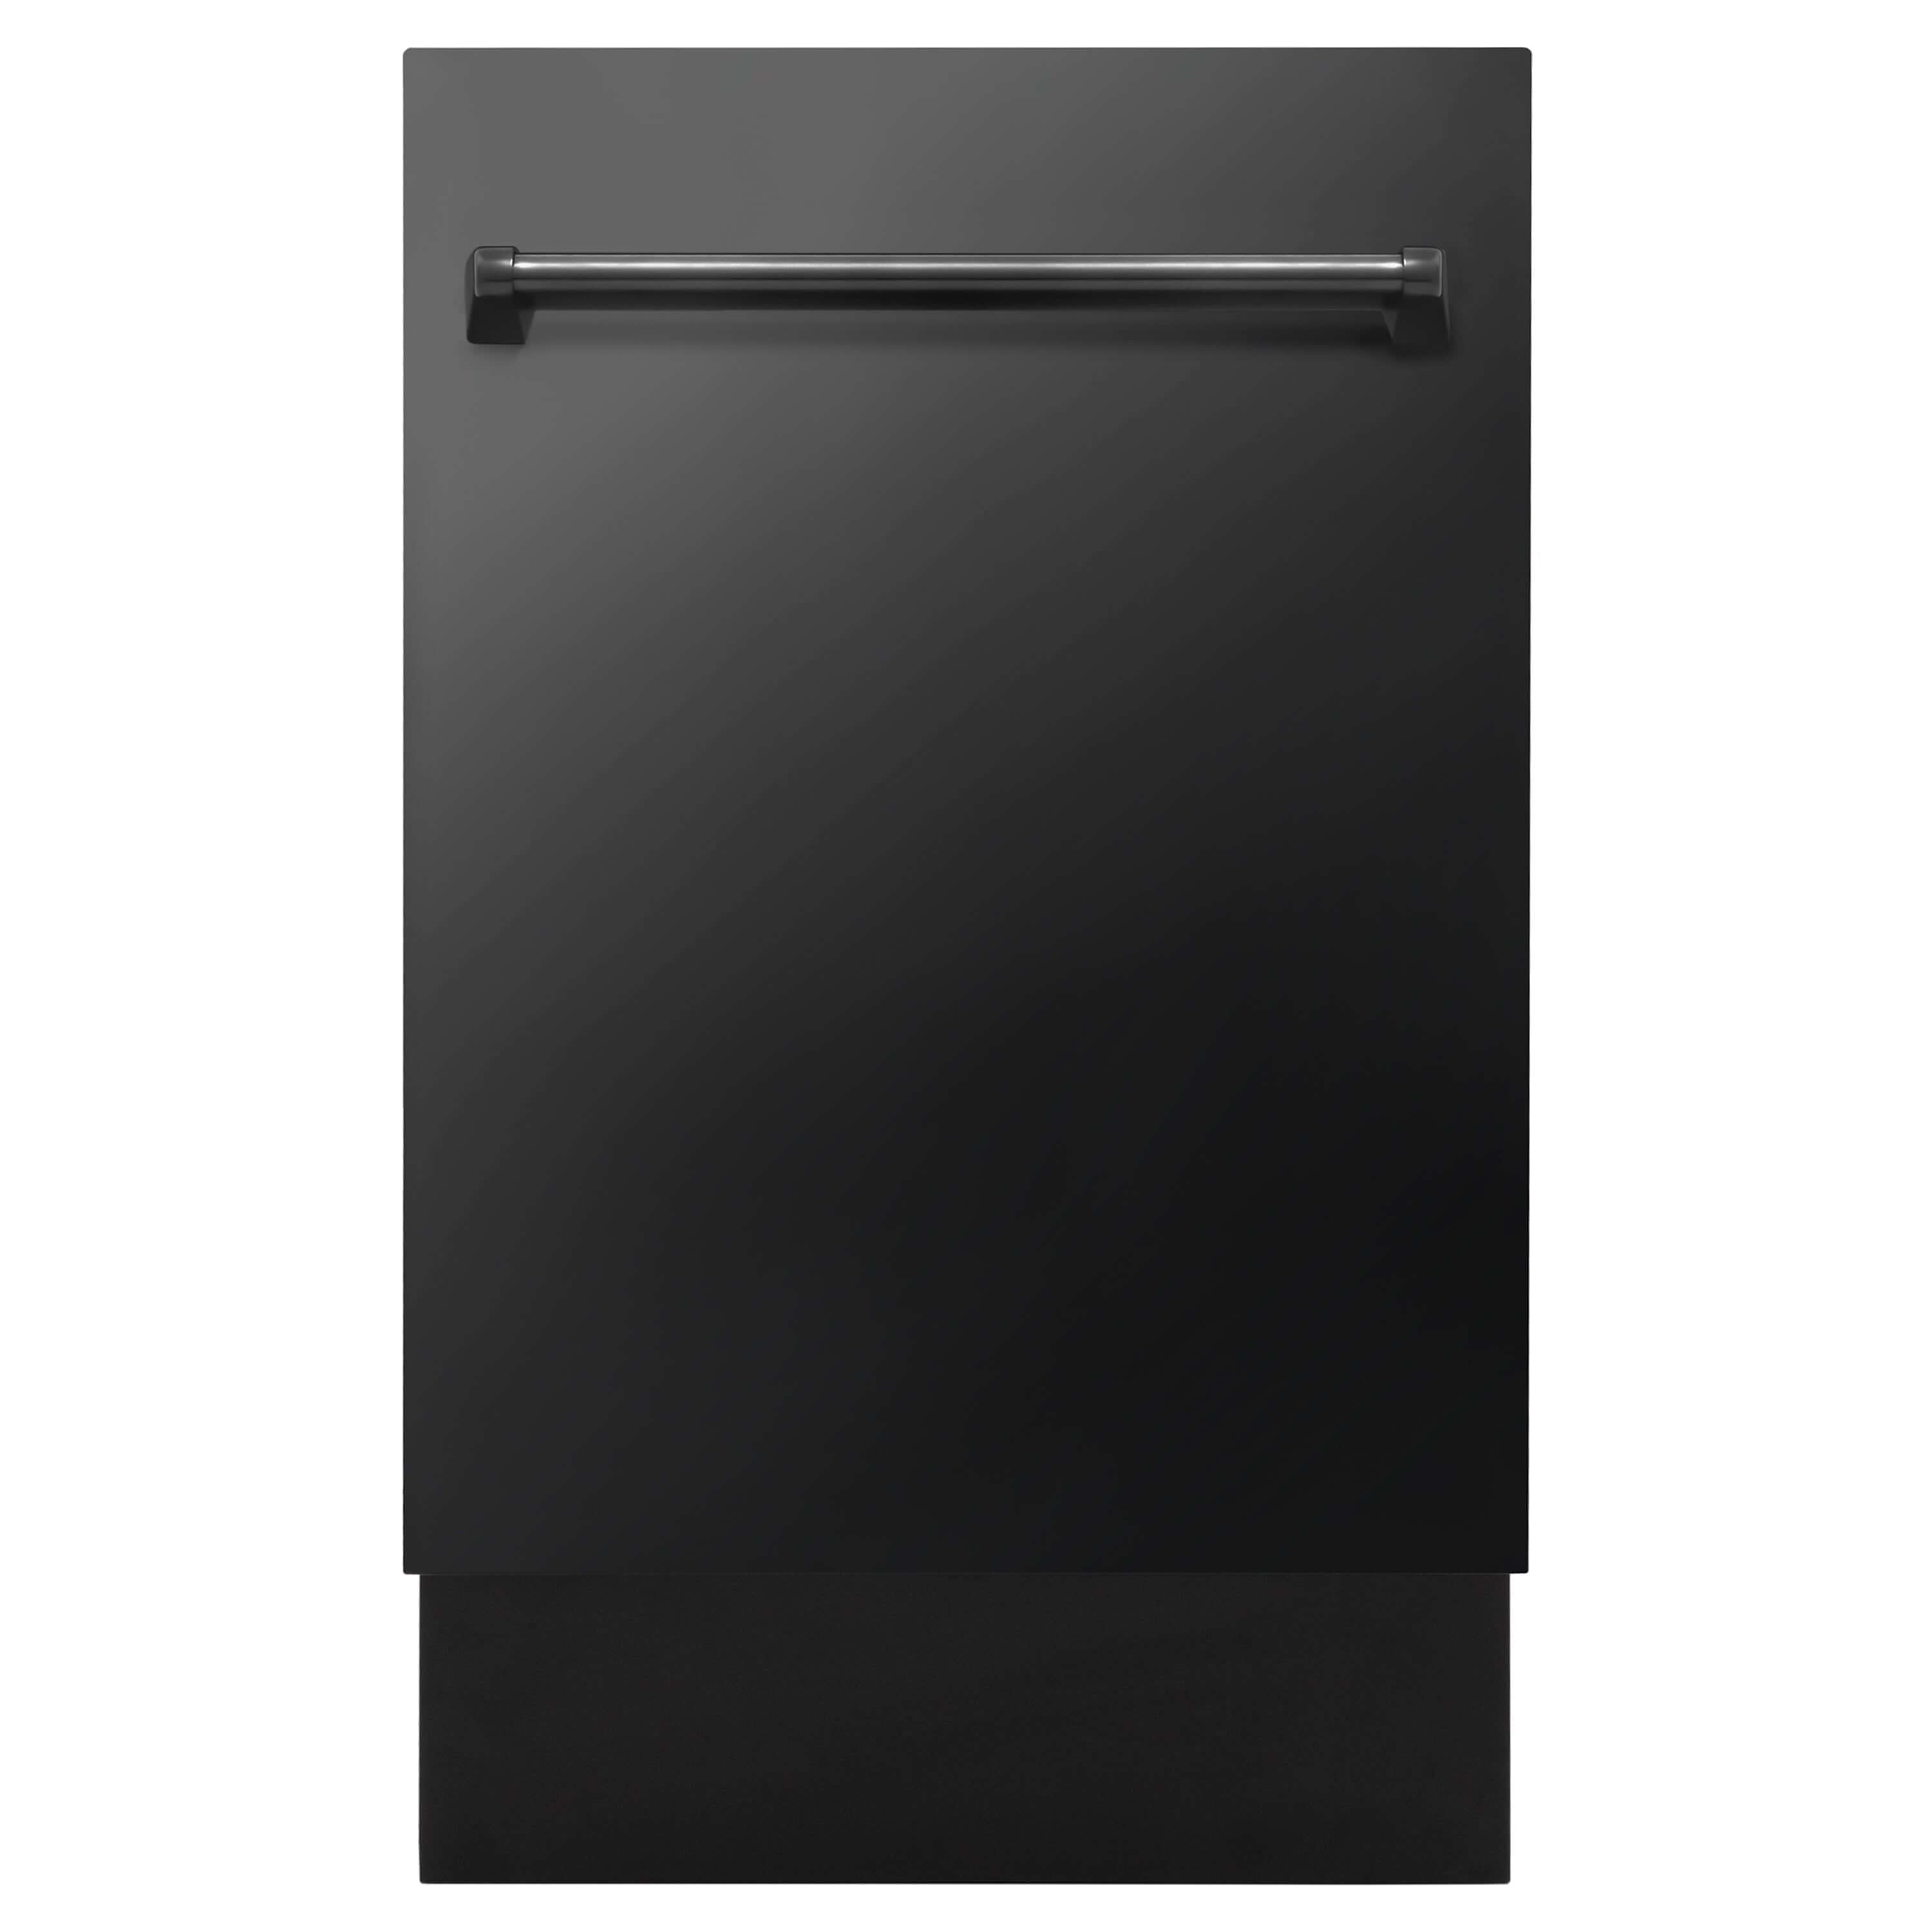 ZLINE 18 in. Tallac Series 3rd Rack Top Control Built-In Dishwasher in Black Stainless Steel with Stainless Steel Tub, 51dBa (DWV-BS-18) front, closed.